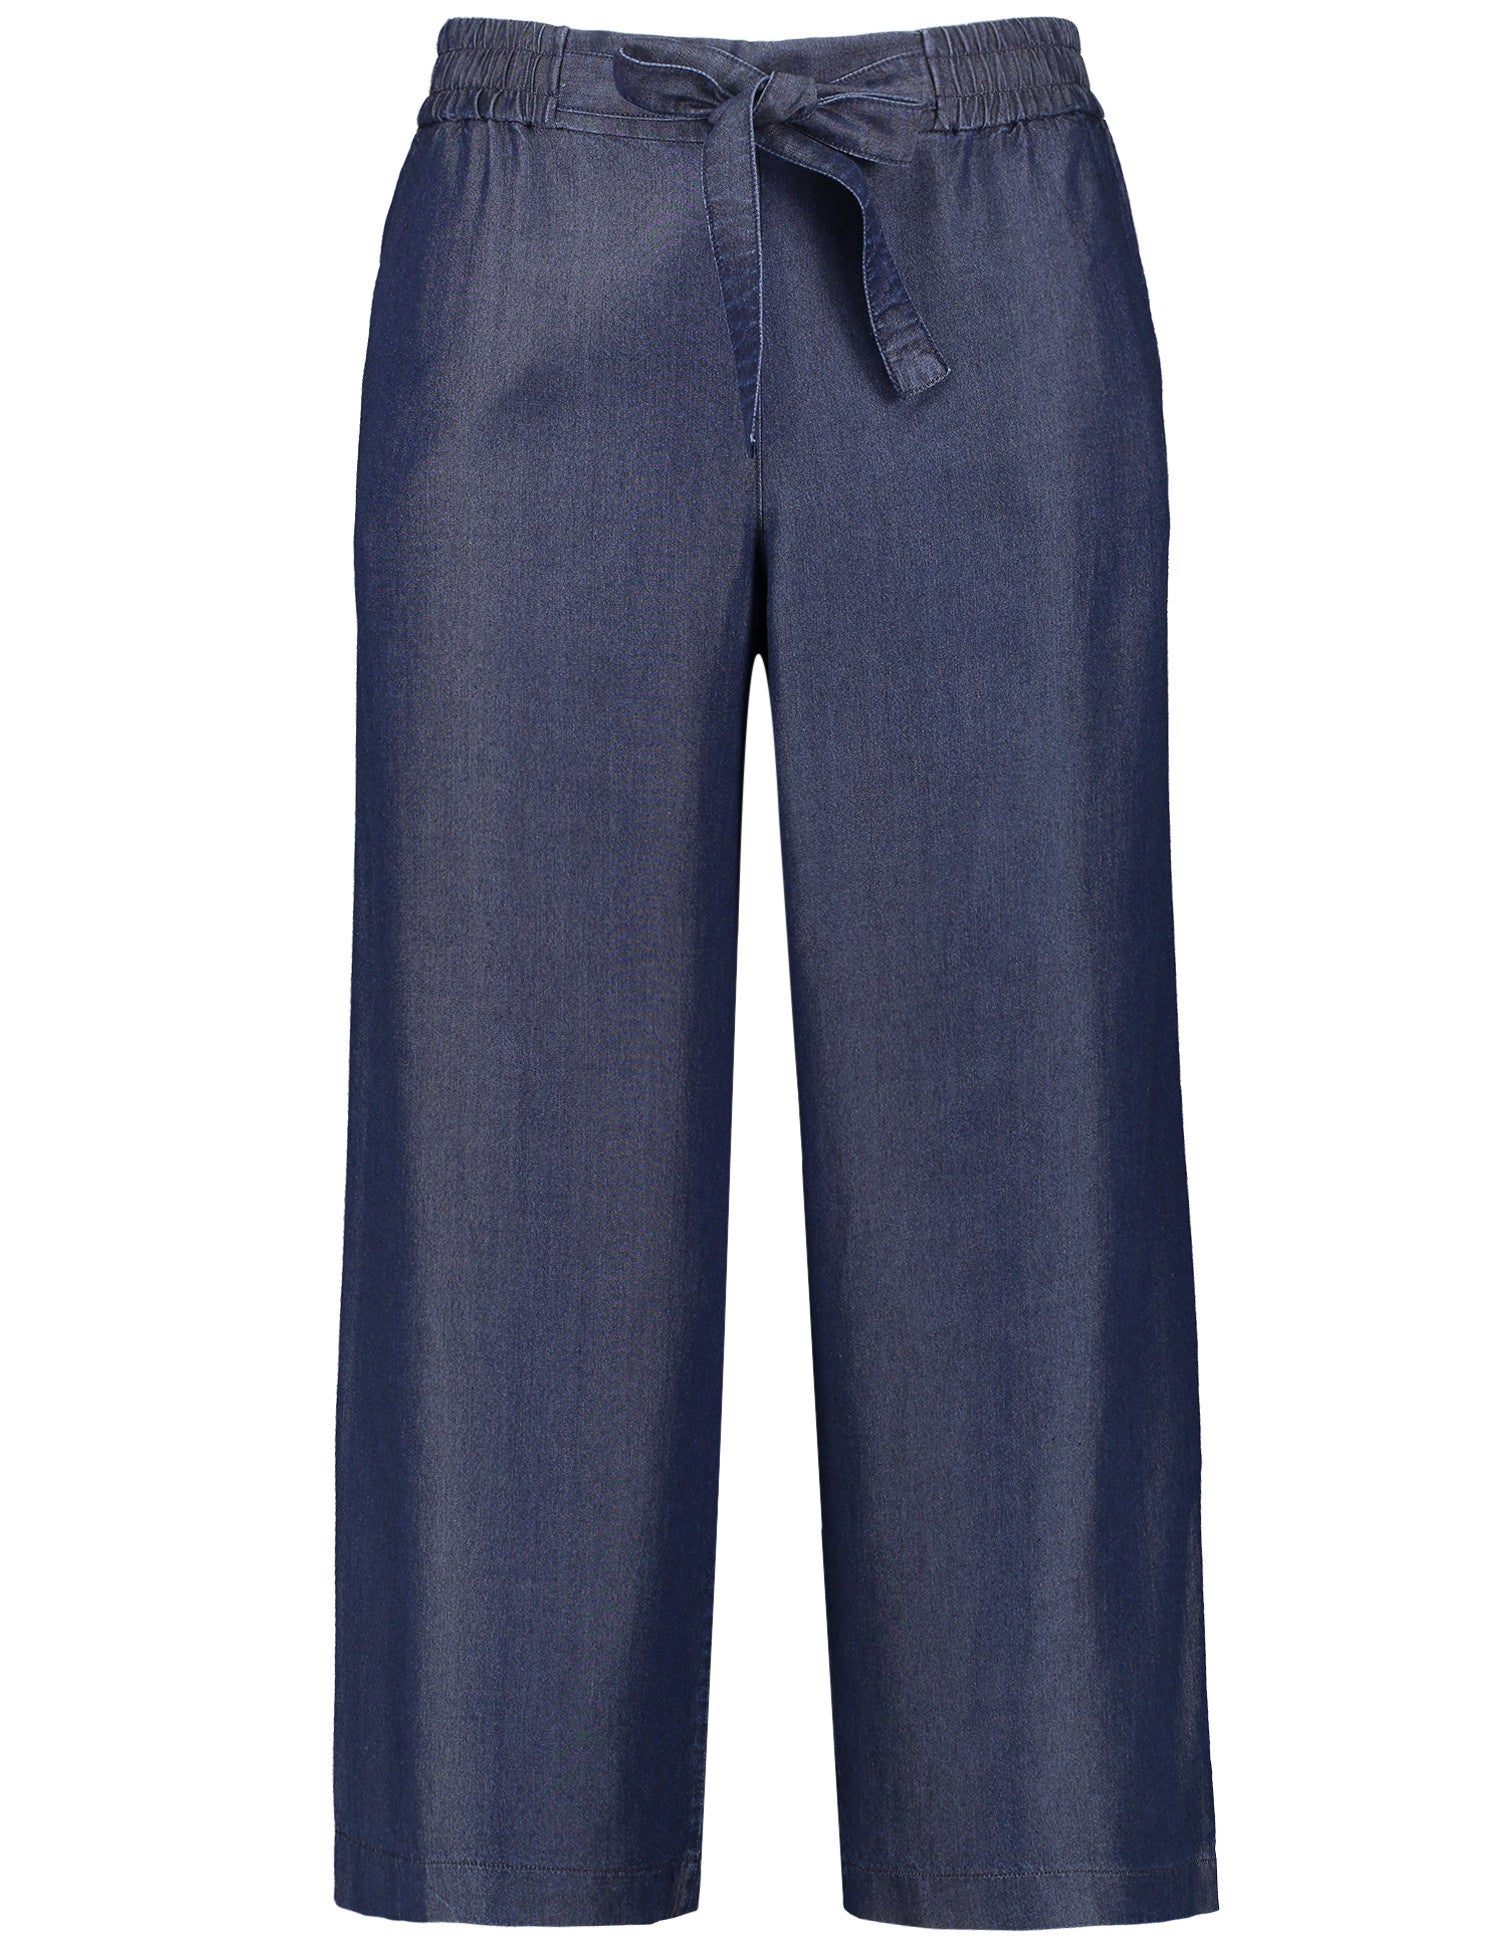 Denim-Look Culottes With A Subtle Shimmer, Lotta